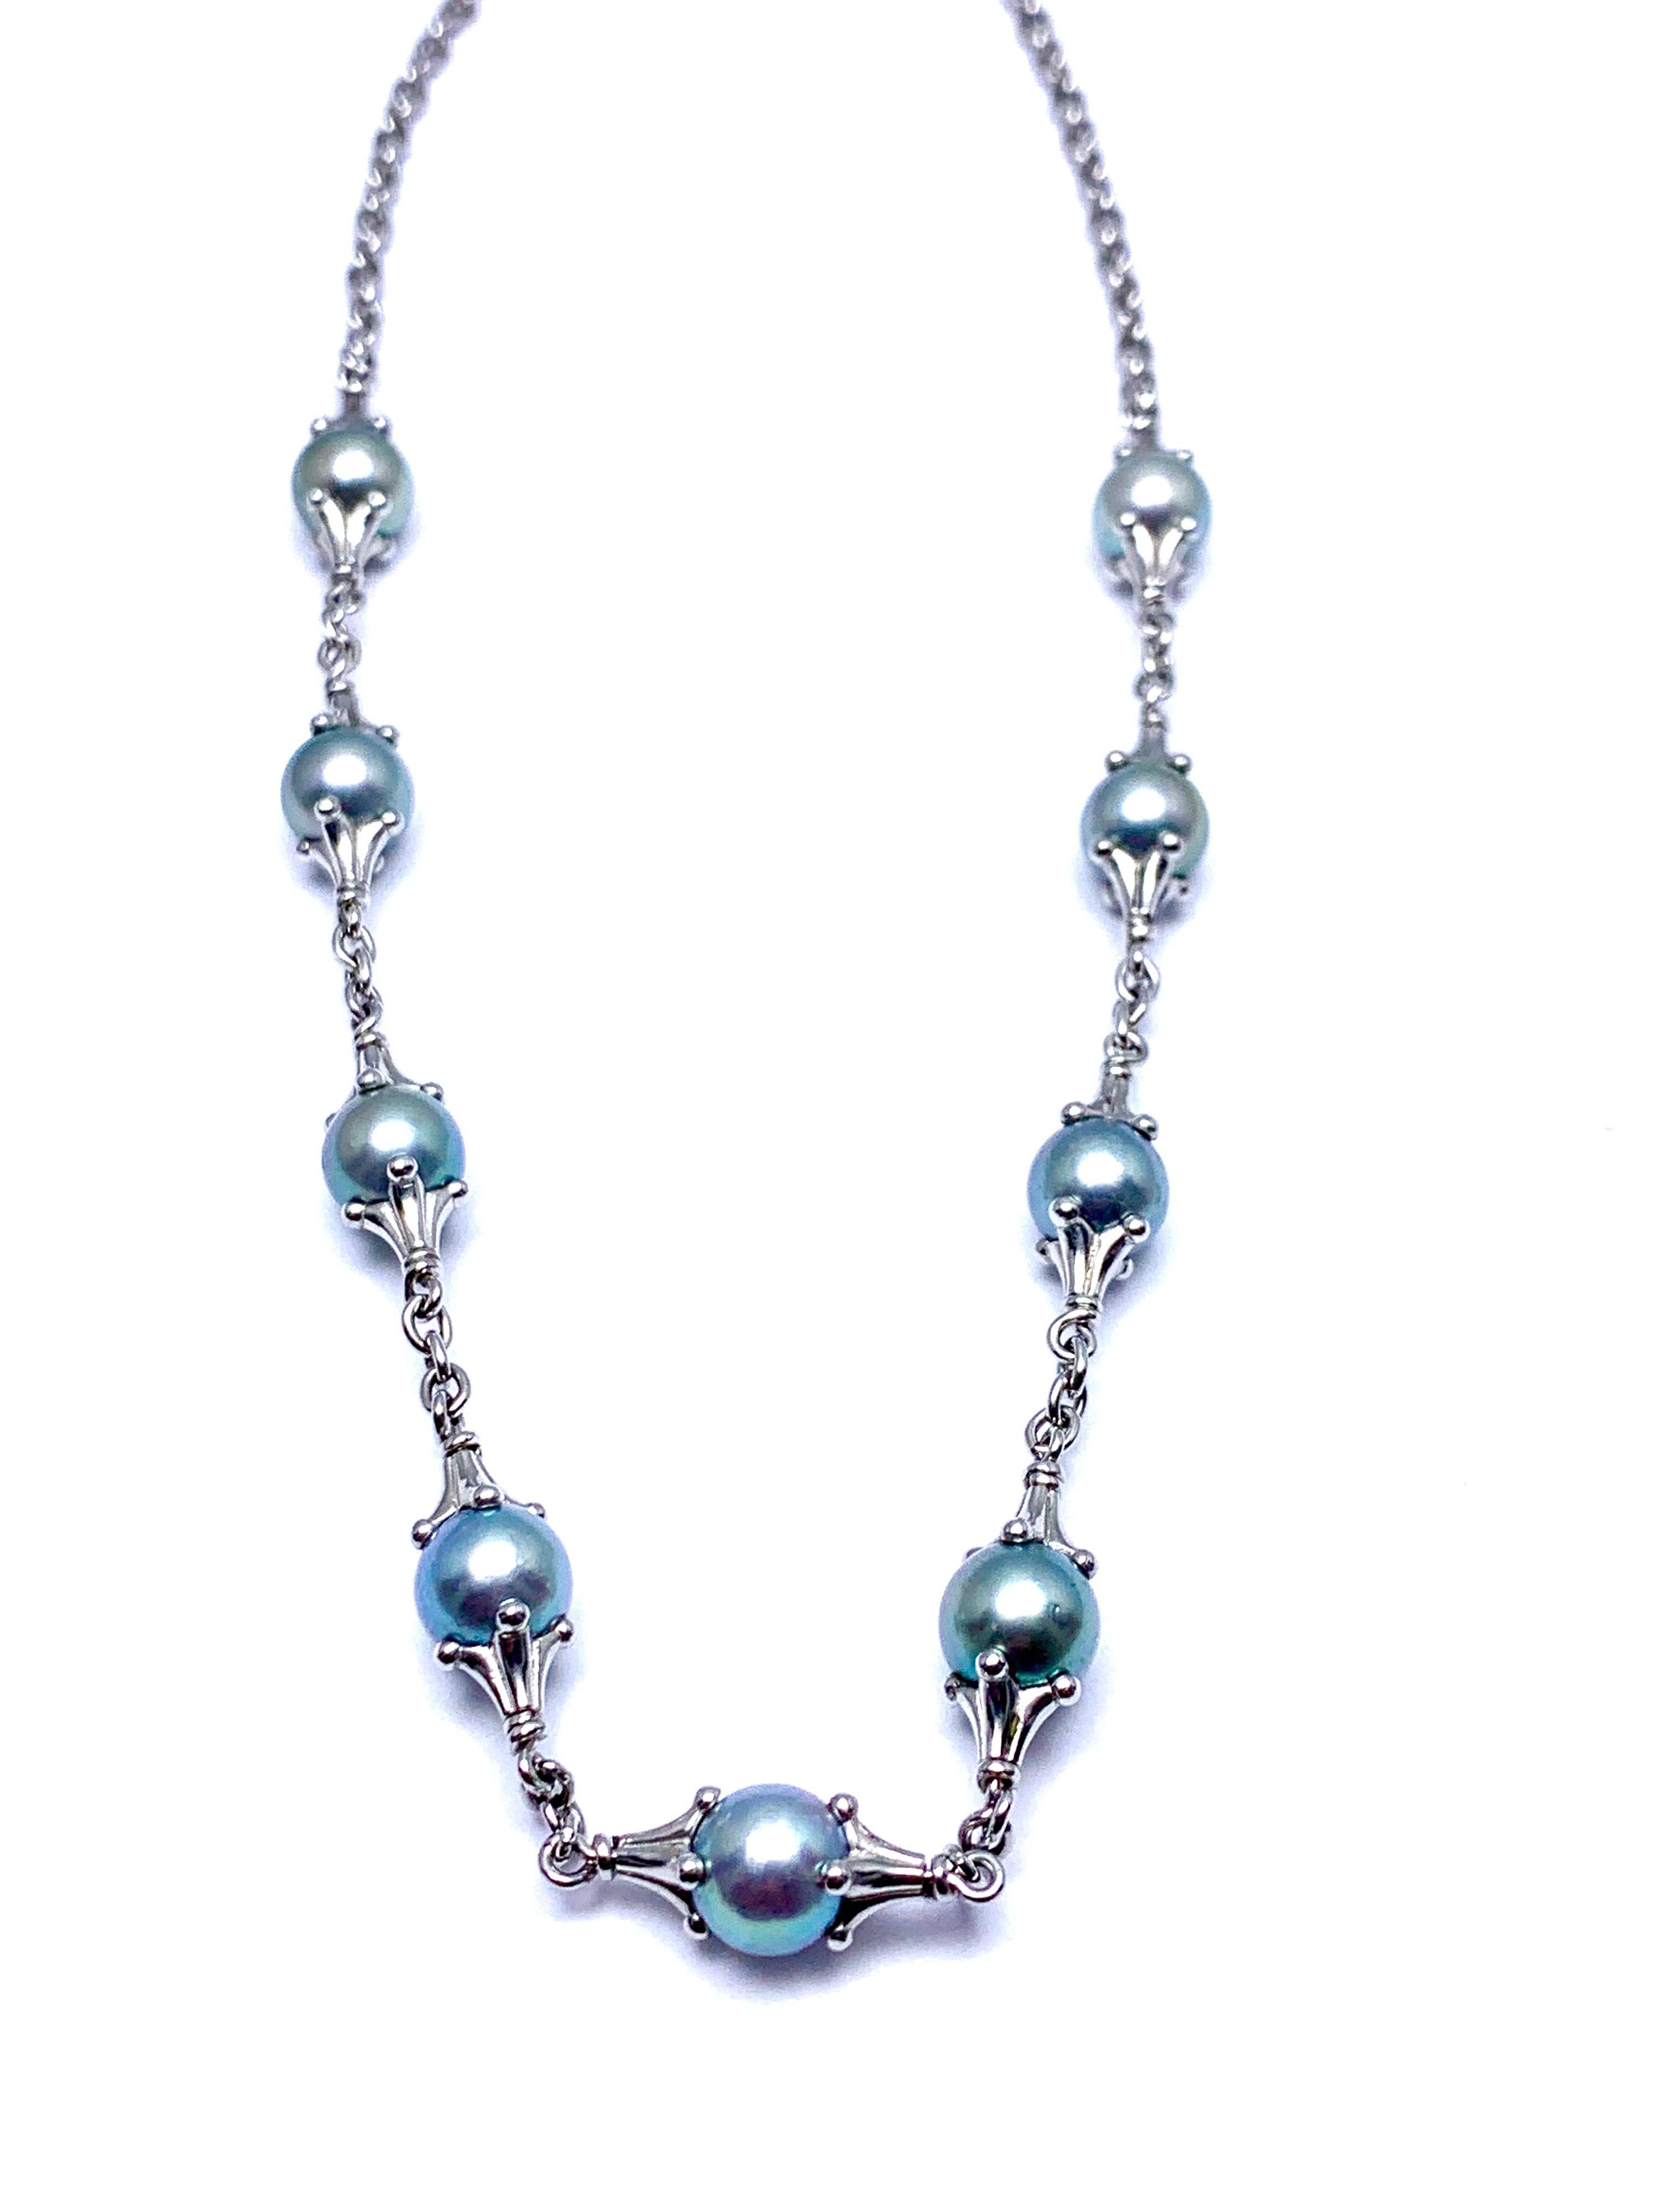 A gorgeous Paul Morelli cultured Tahitian Pearl and platinum necklace.  The Pearls measure from 8.50 - 9.00mm, set in stations between links. The necklace measures 16.50 inches in length, and features a toggle clasp. Signed 